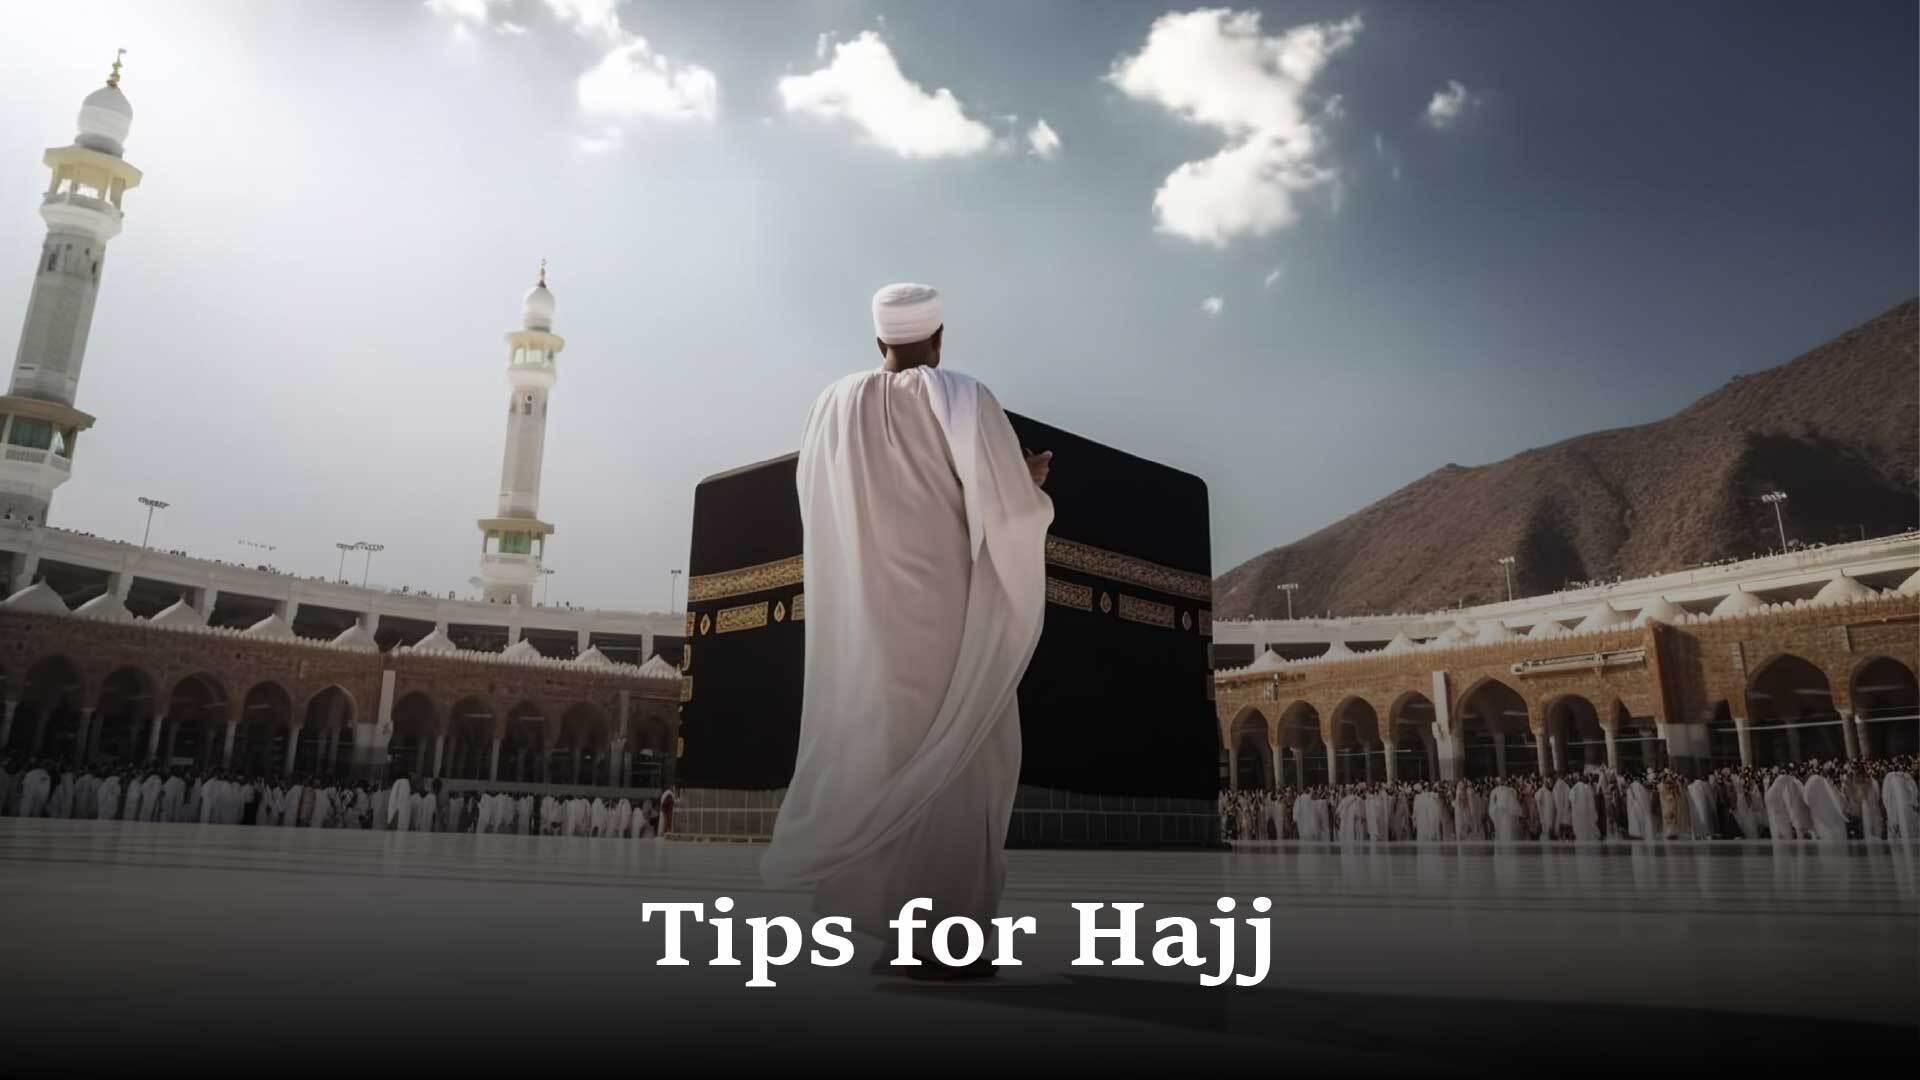 Amazing Tips for going to Hajj